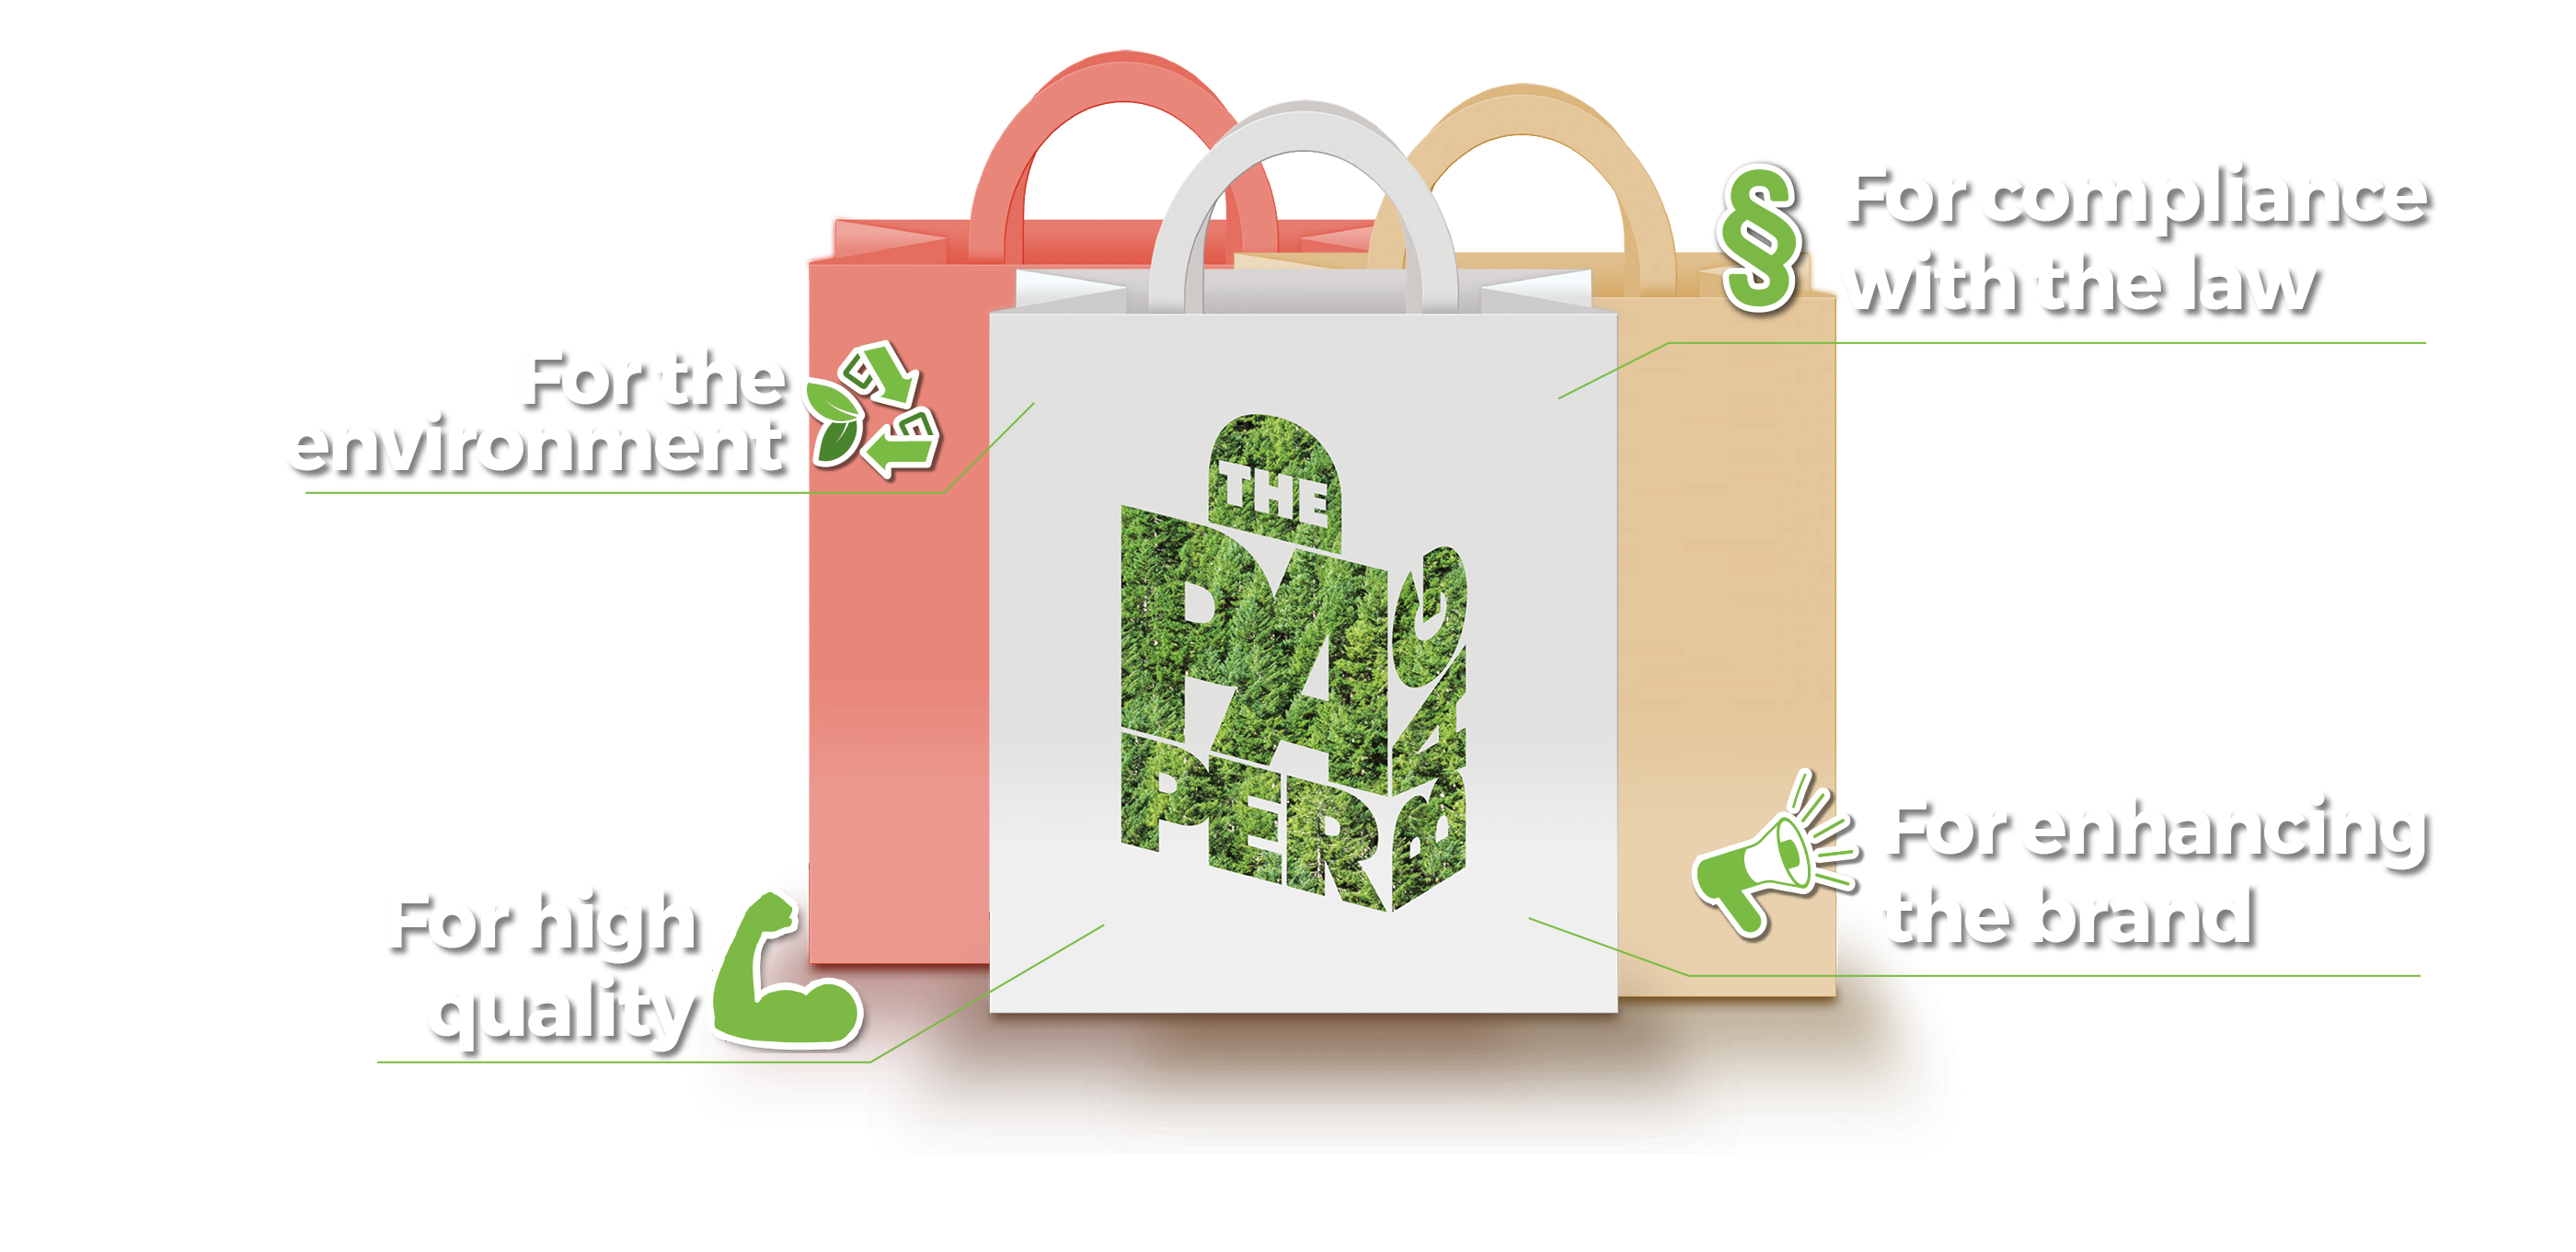 graphic of paper bags of different colors, values: for the environment, for compliance with the law, for high quality, for enhancing the brand